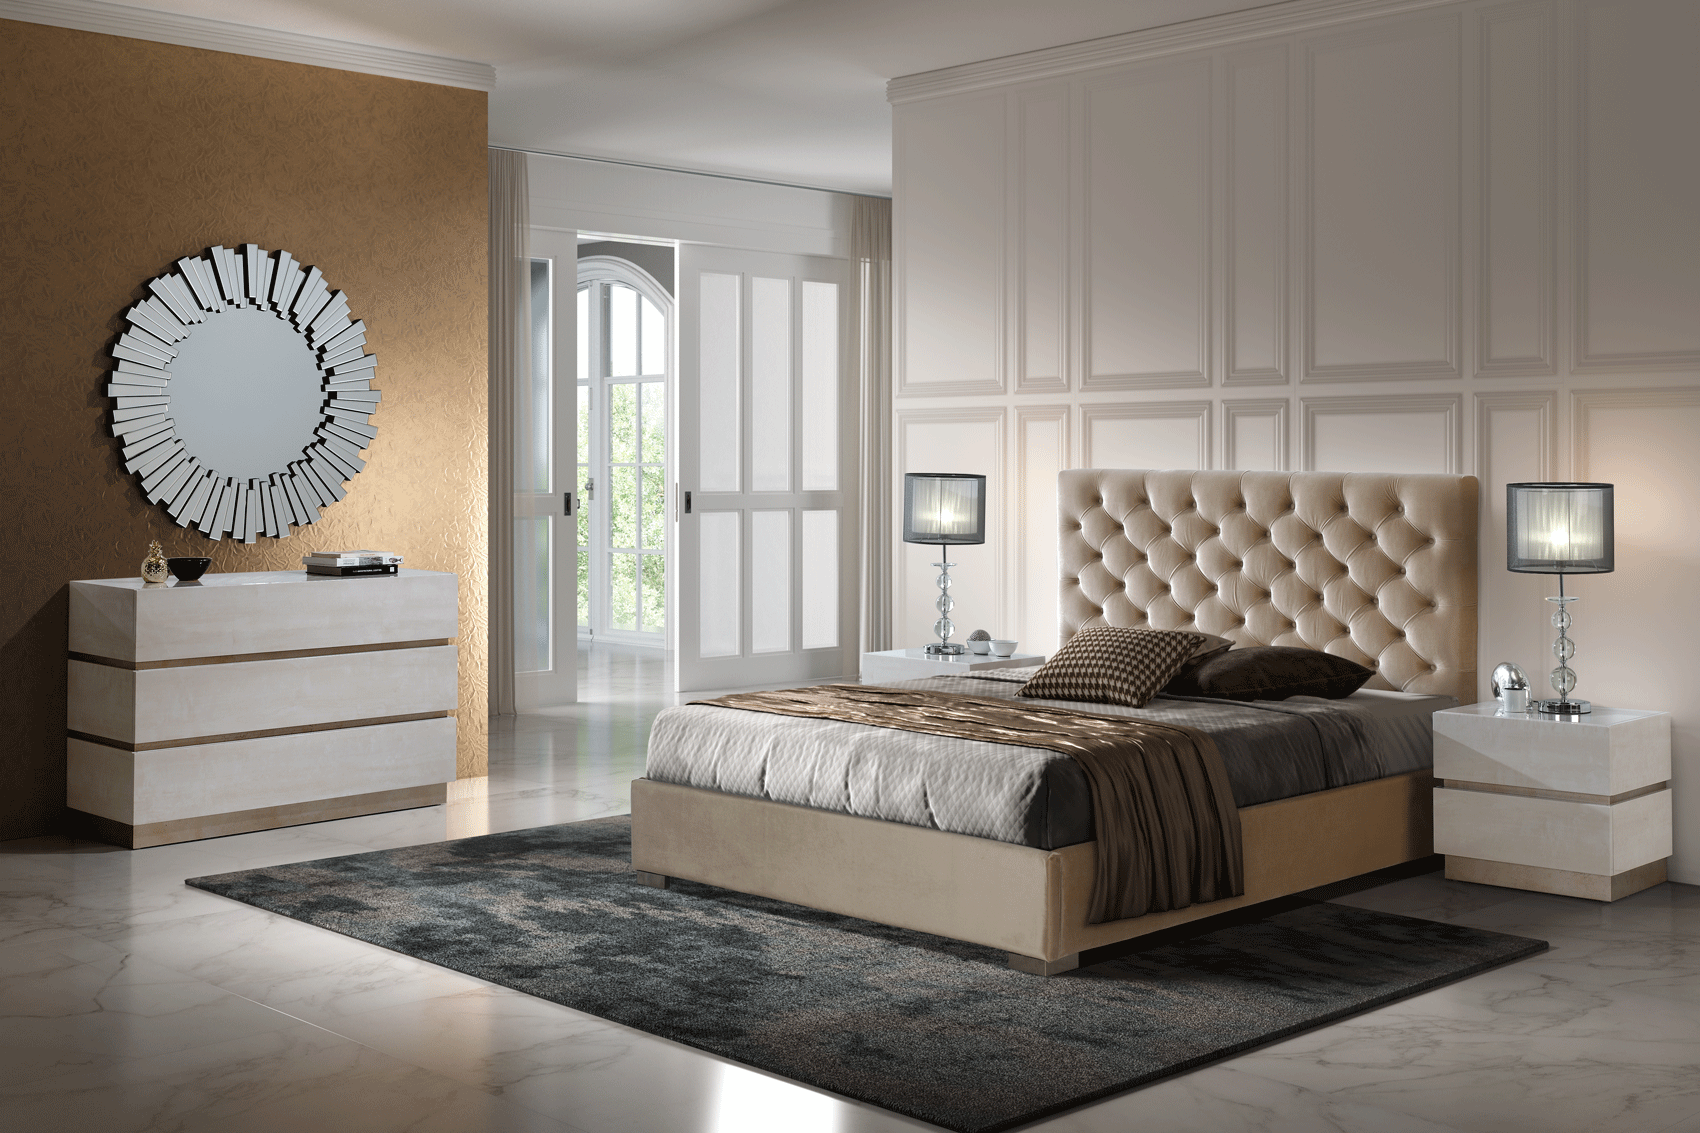 Bedroom Furniture Mirrors 852 Gala Bed, M-151, C-151, E-100